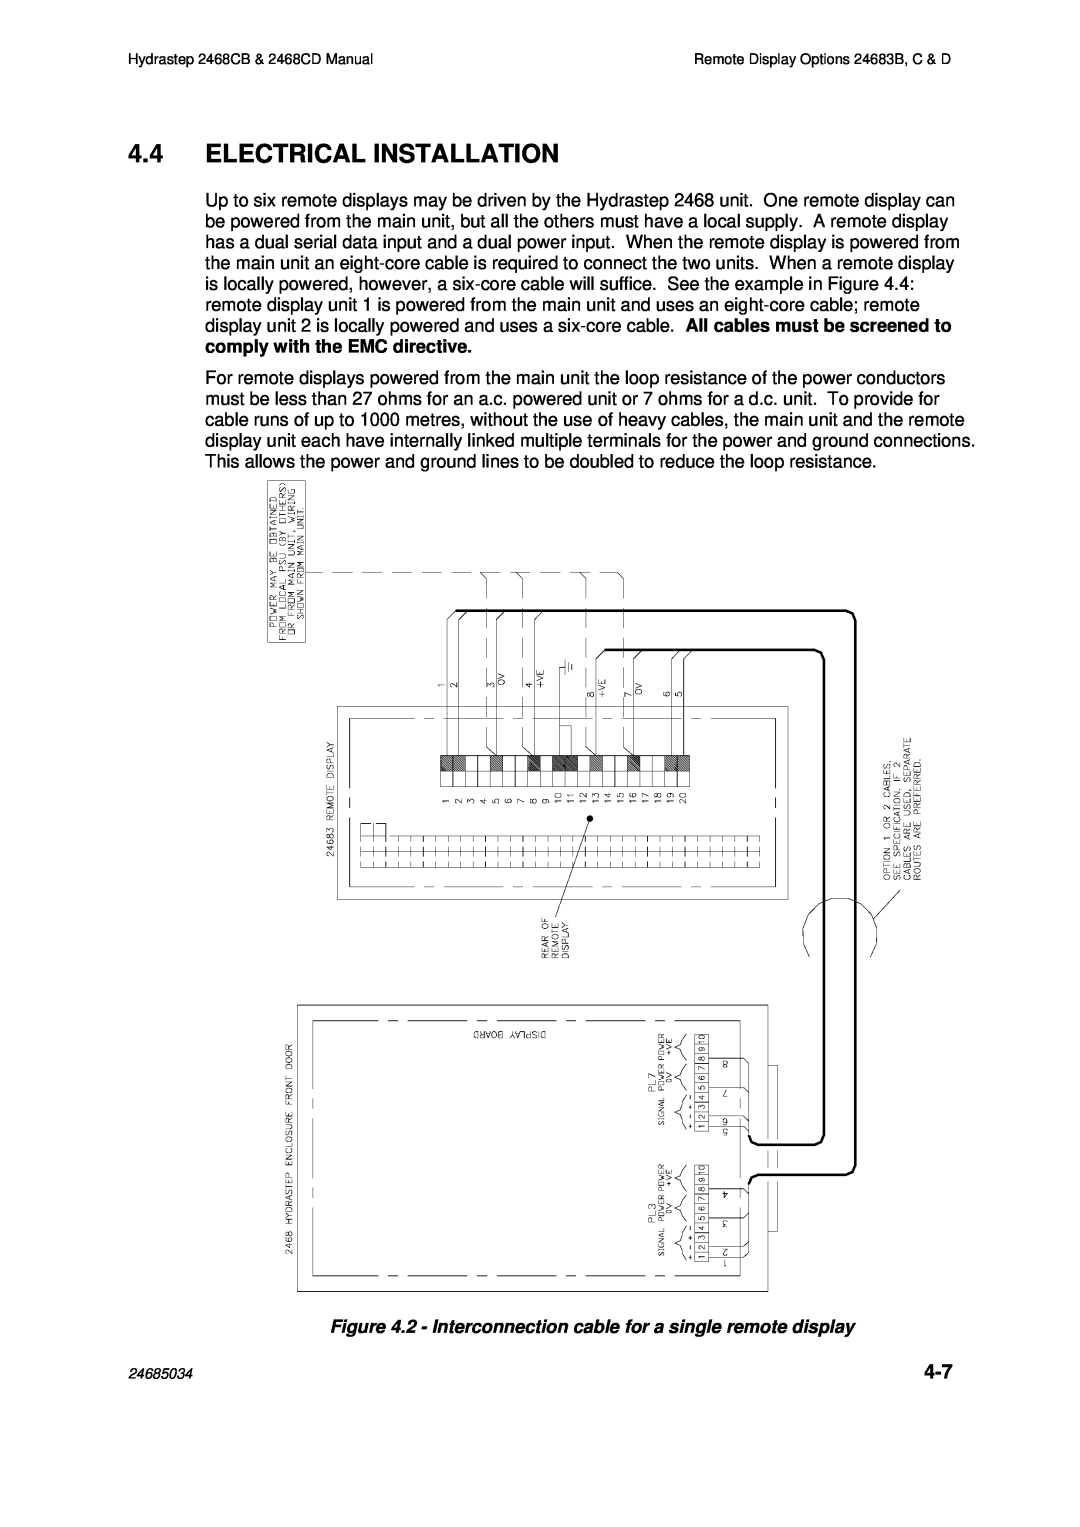 Emerson 2468CD, 2468CB manual 4.4ELECTRICAL INSTALLATION, comply with the EMC directive 